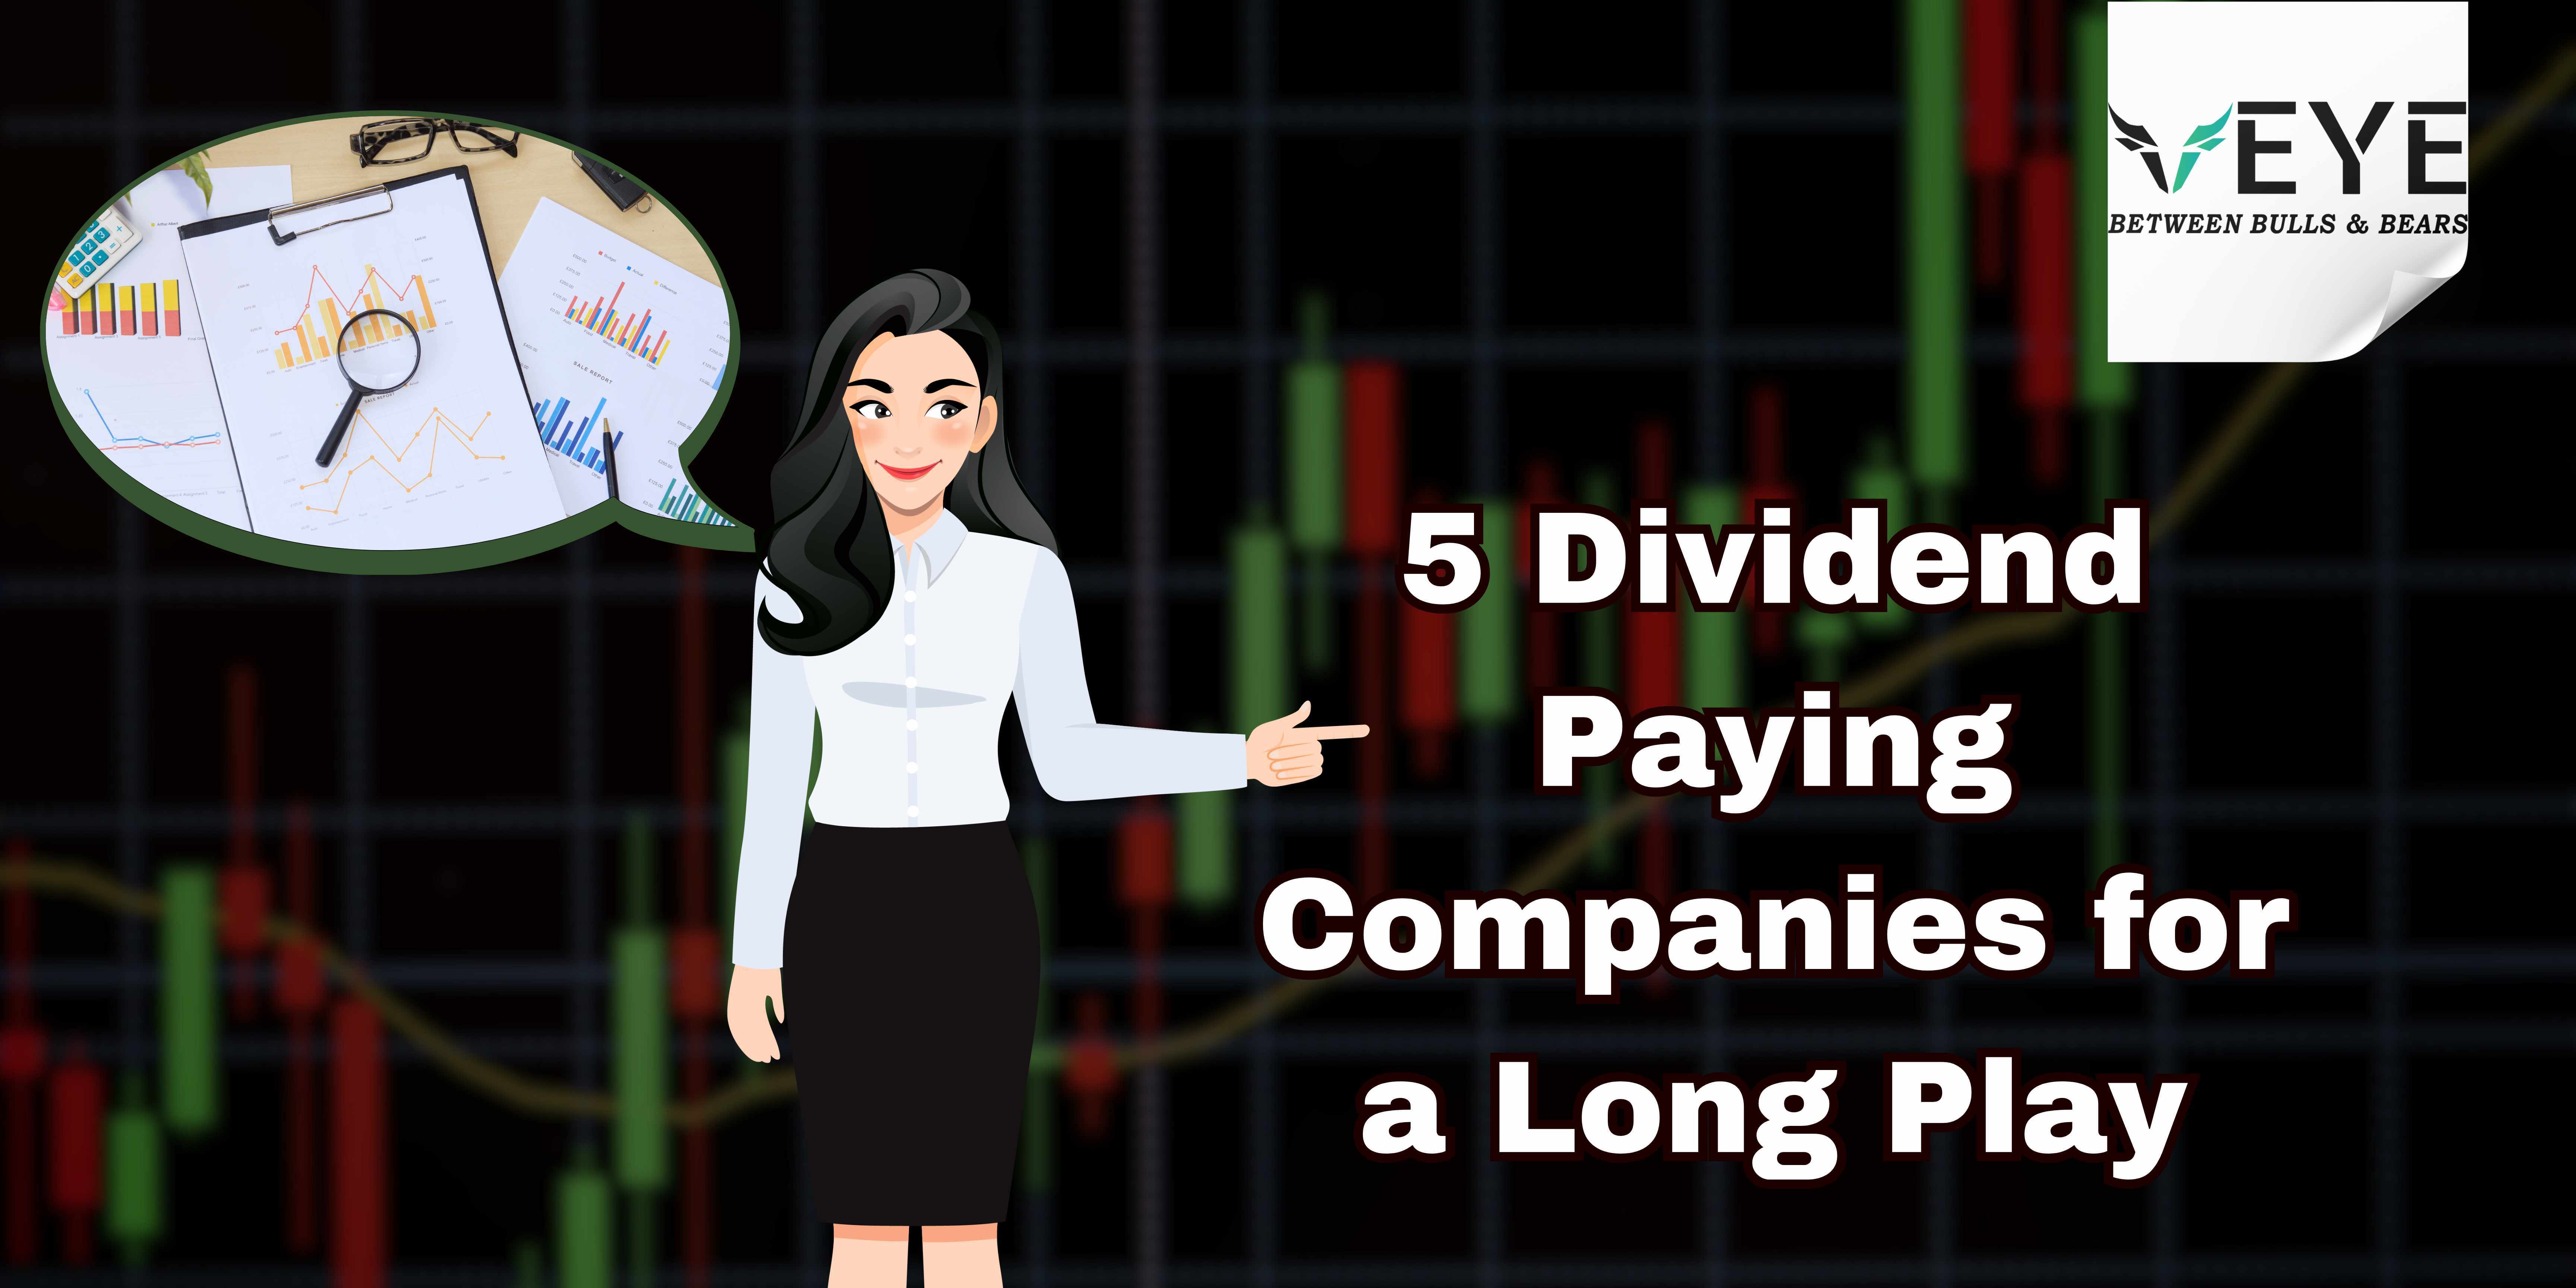 5 Dividend Paying Companies for a Long Play